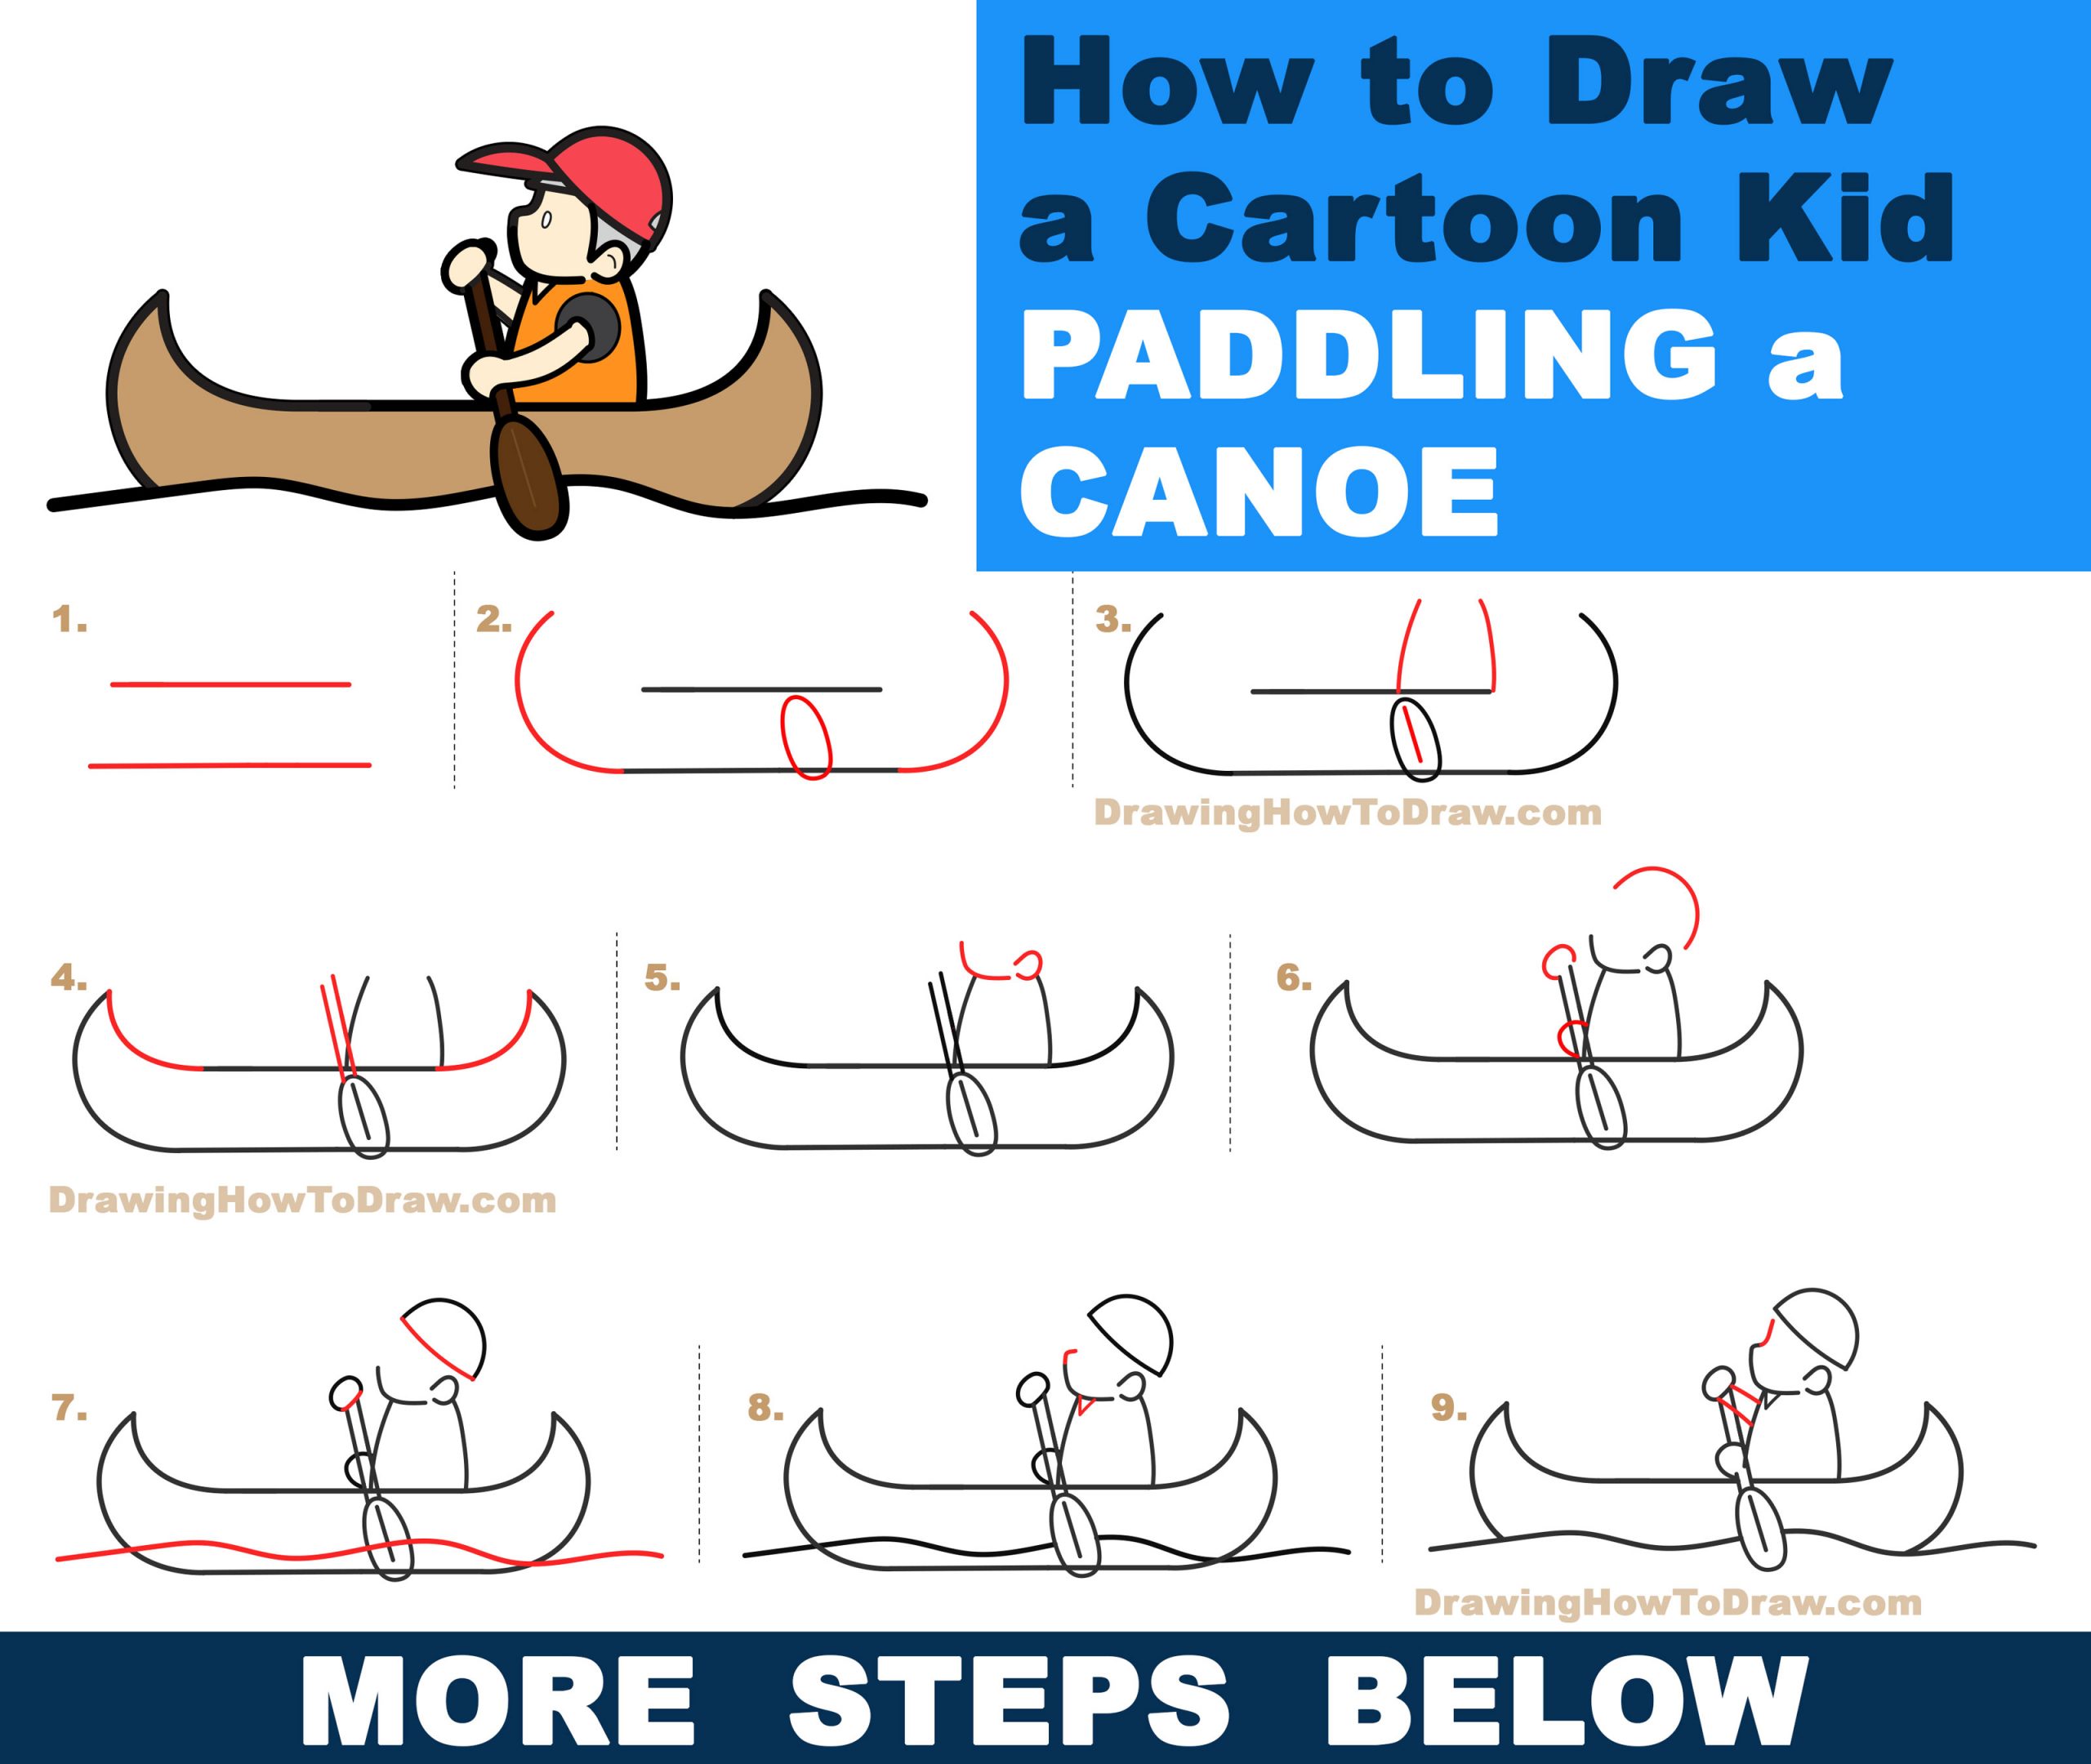 How to Draw a Cartoon Kid Paddling a Canoe Easy Step by Step Drawing Tutorial for Kids